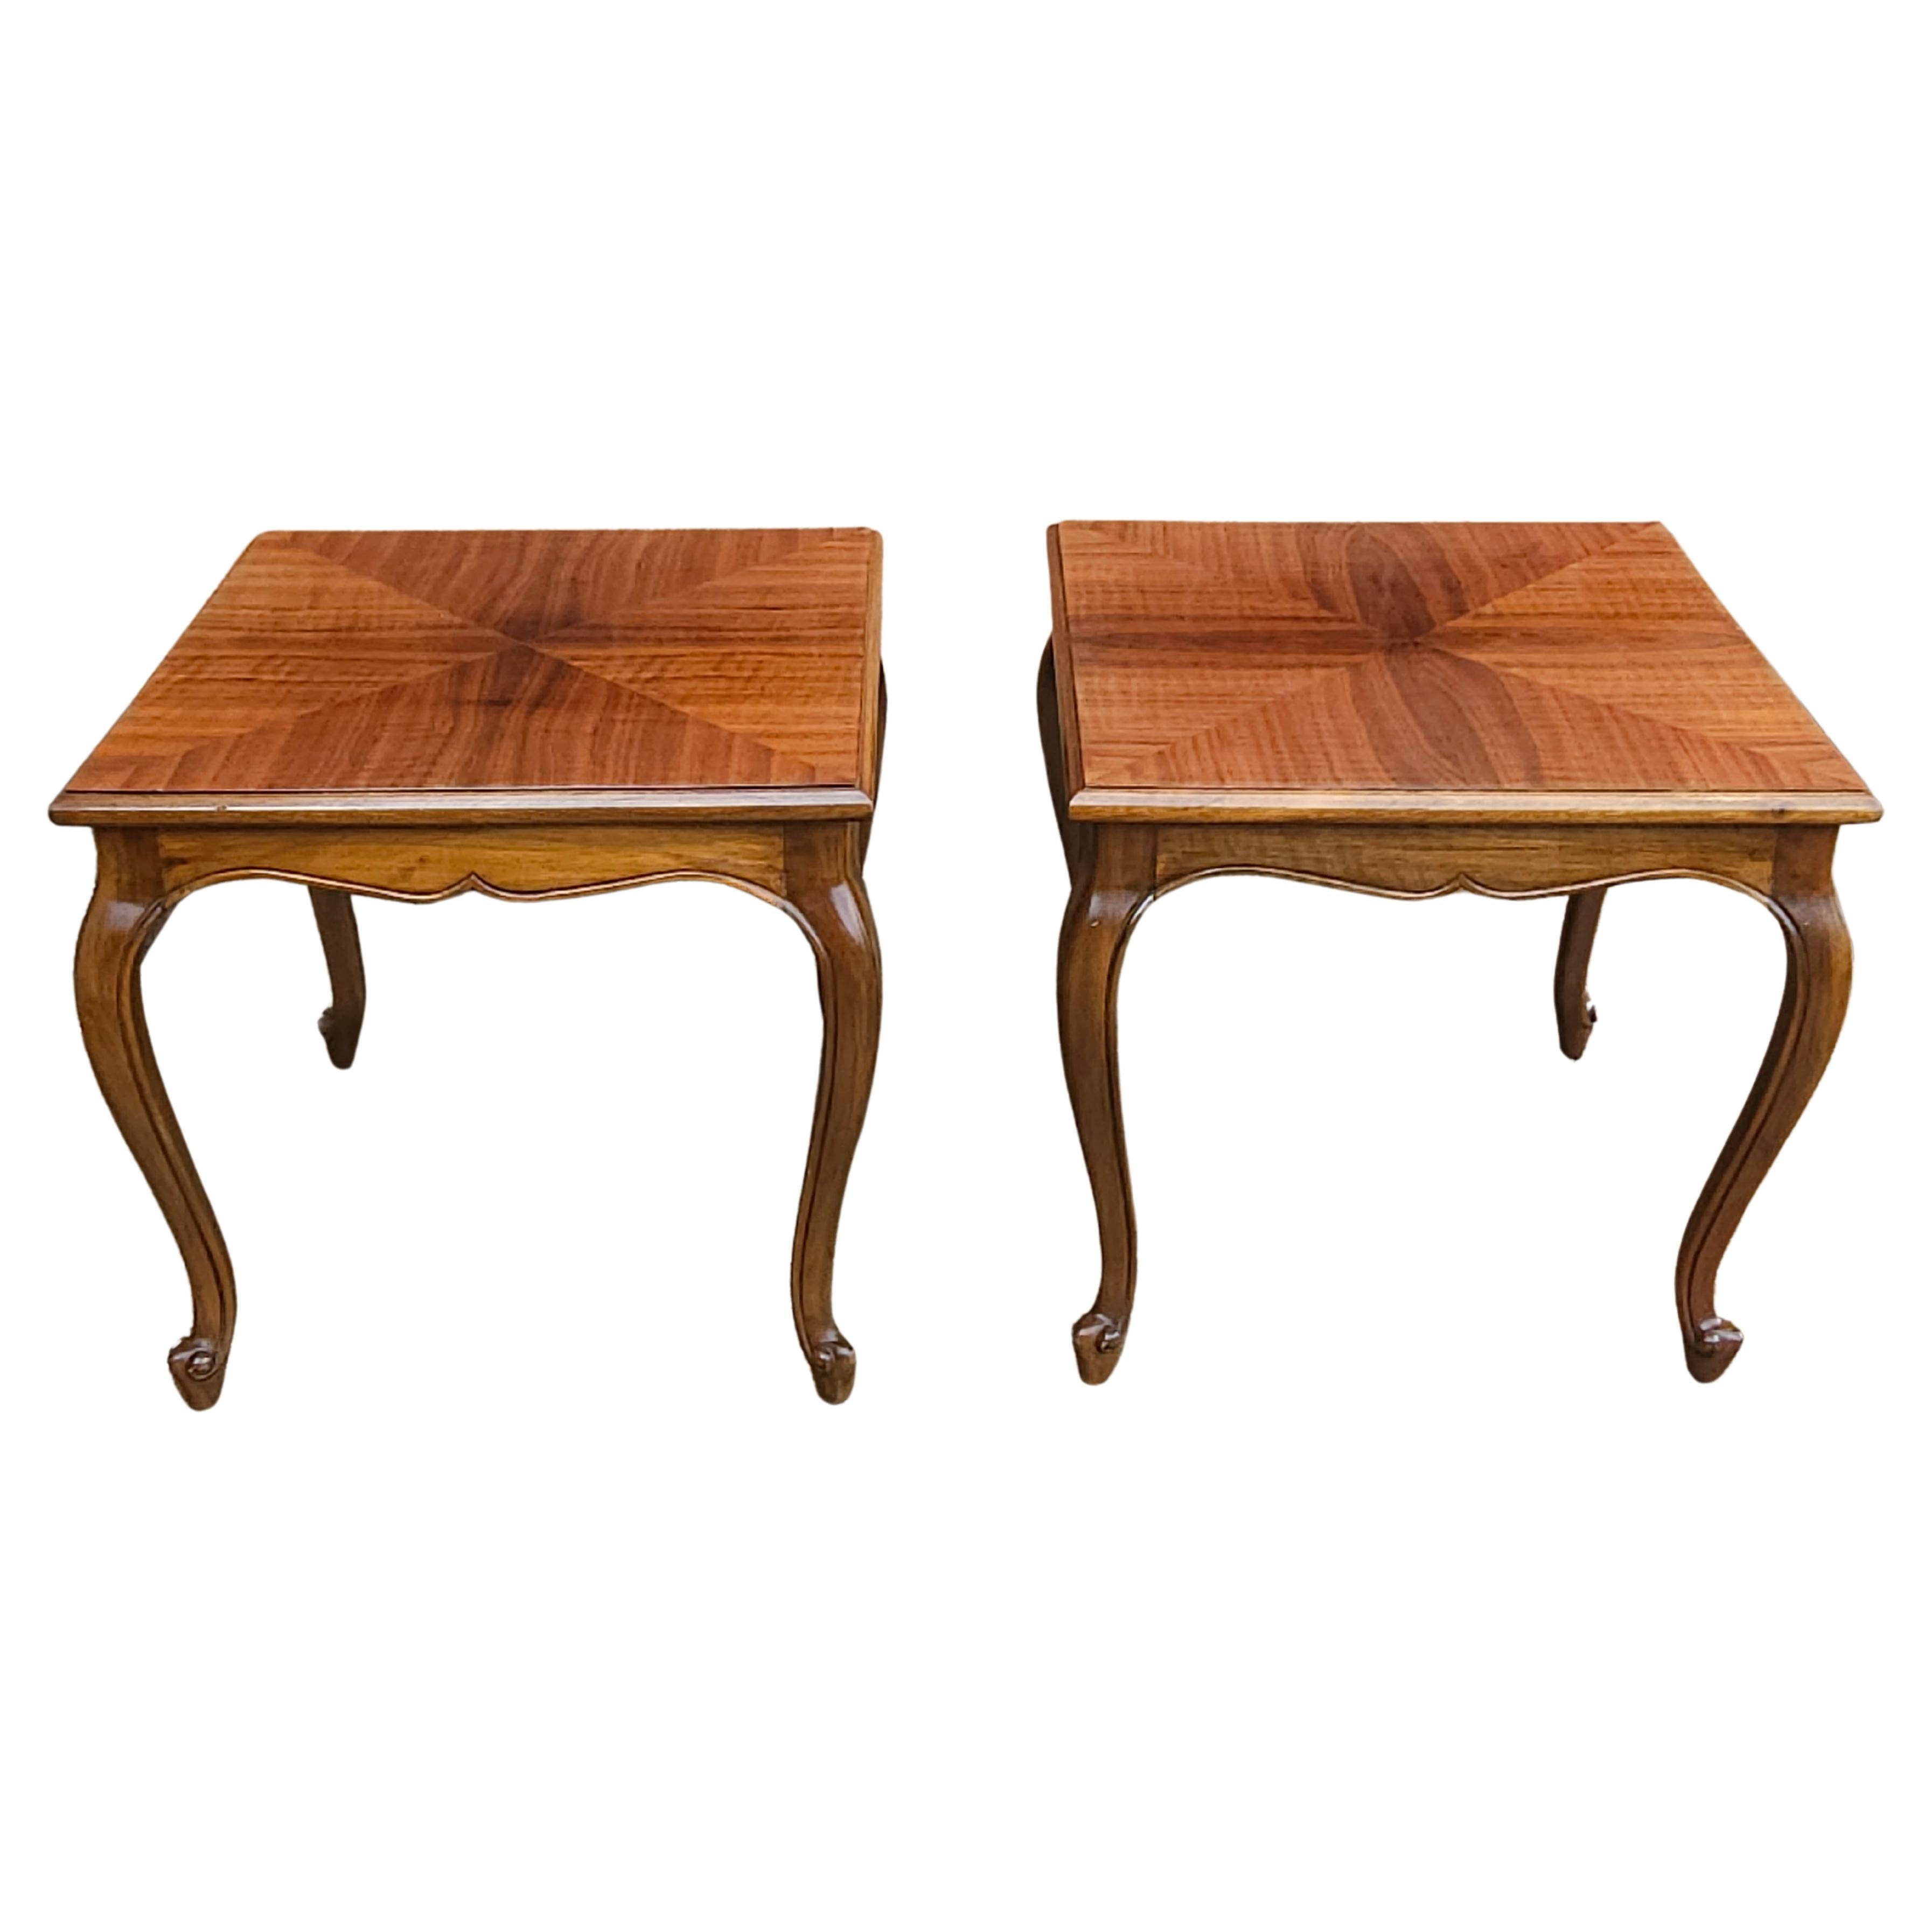 20th C. Handcrafted Bookmatched Brazilian Rosewood Provincial Side Tables, Pair